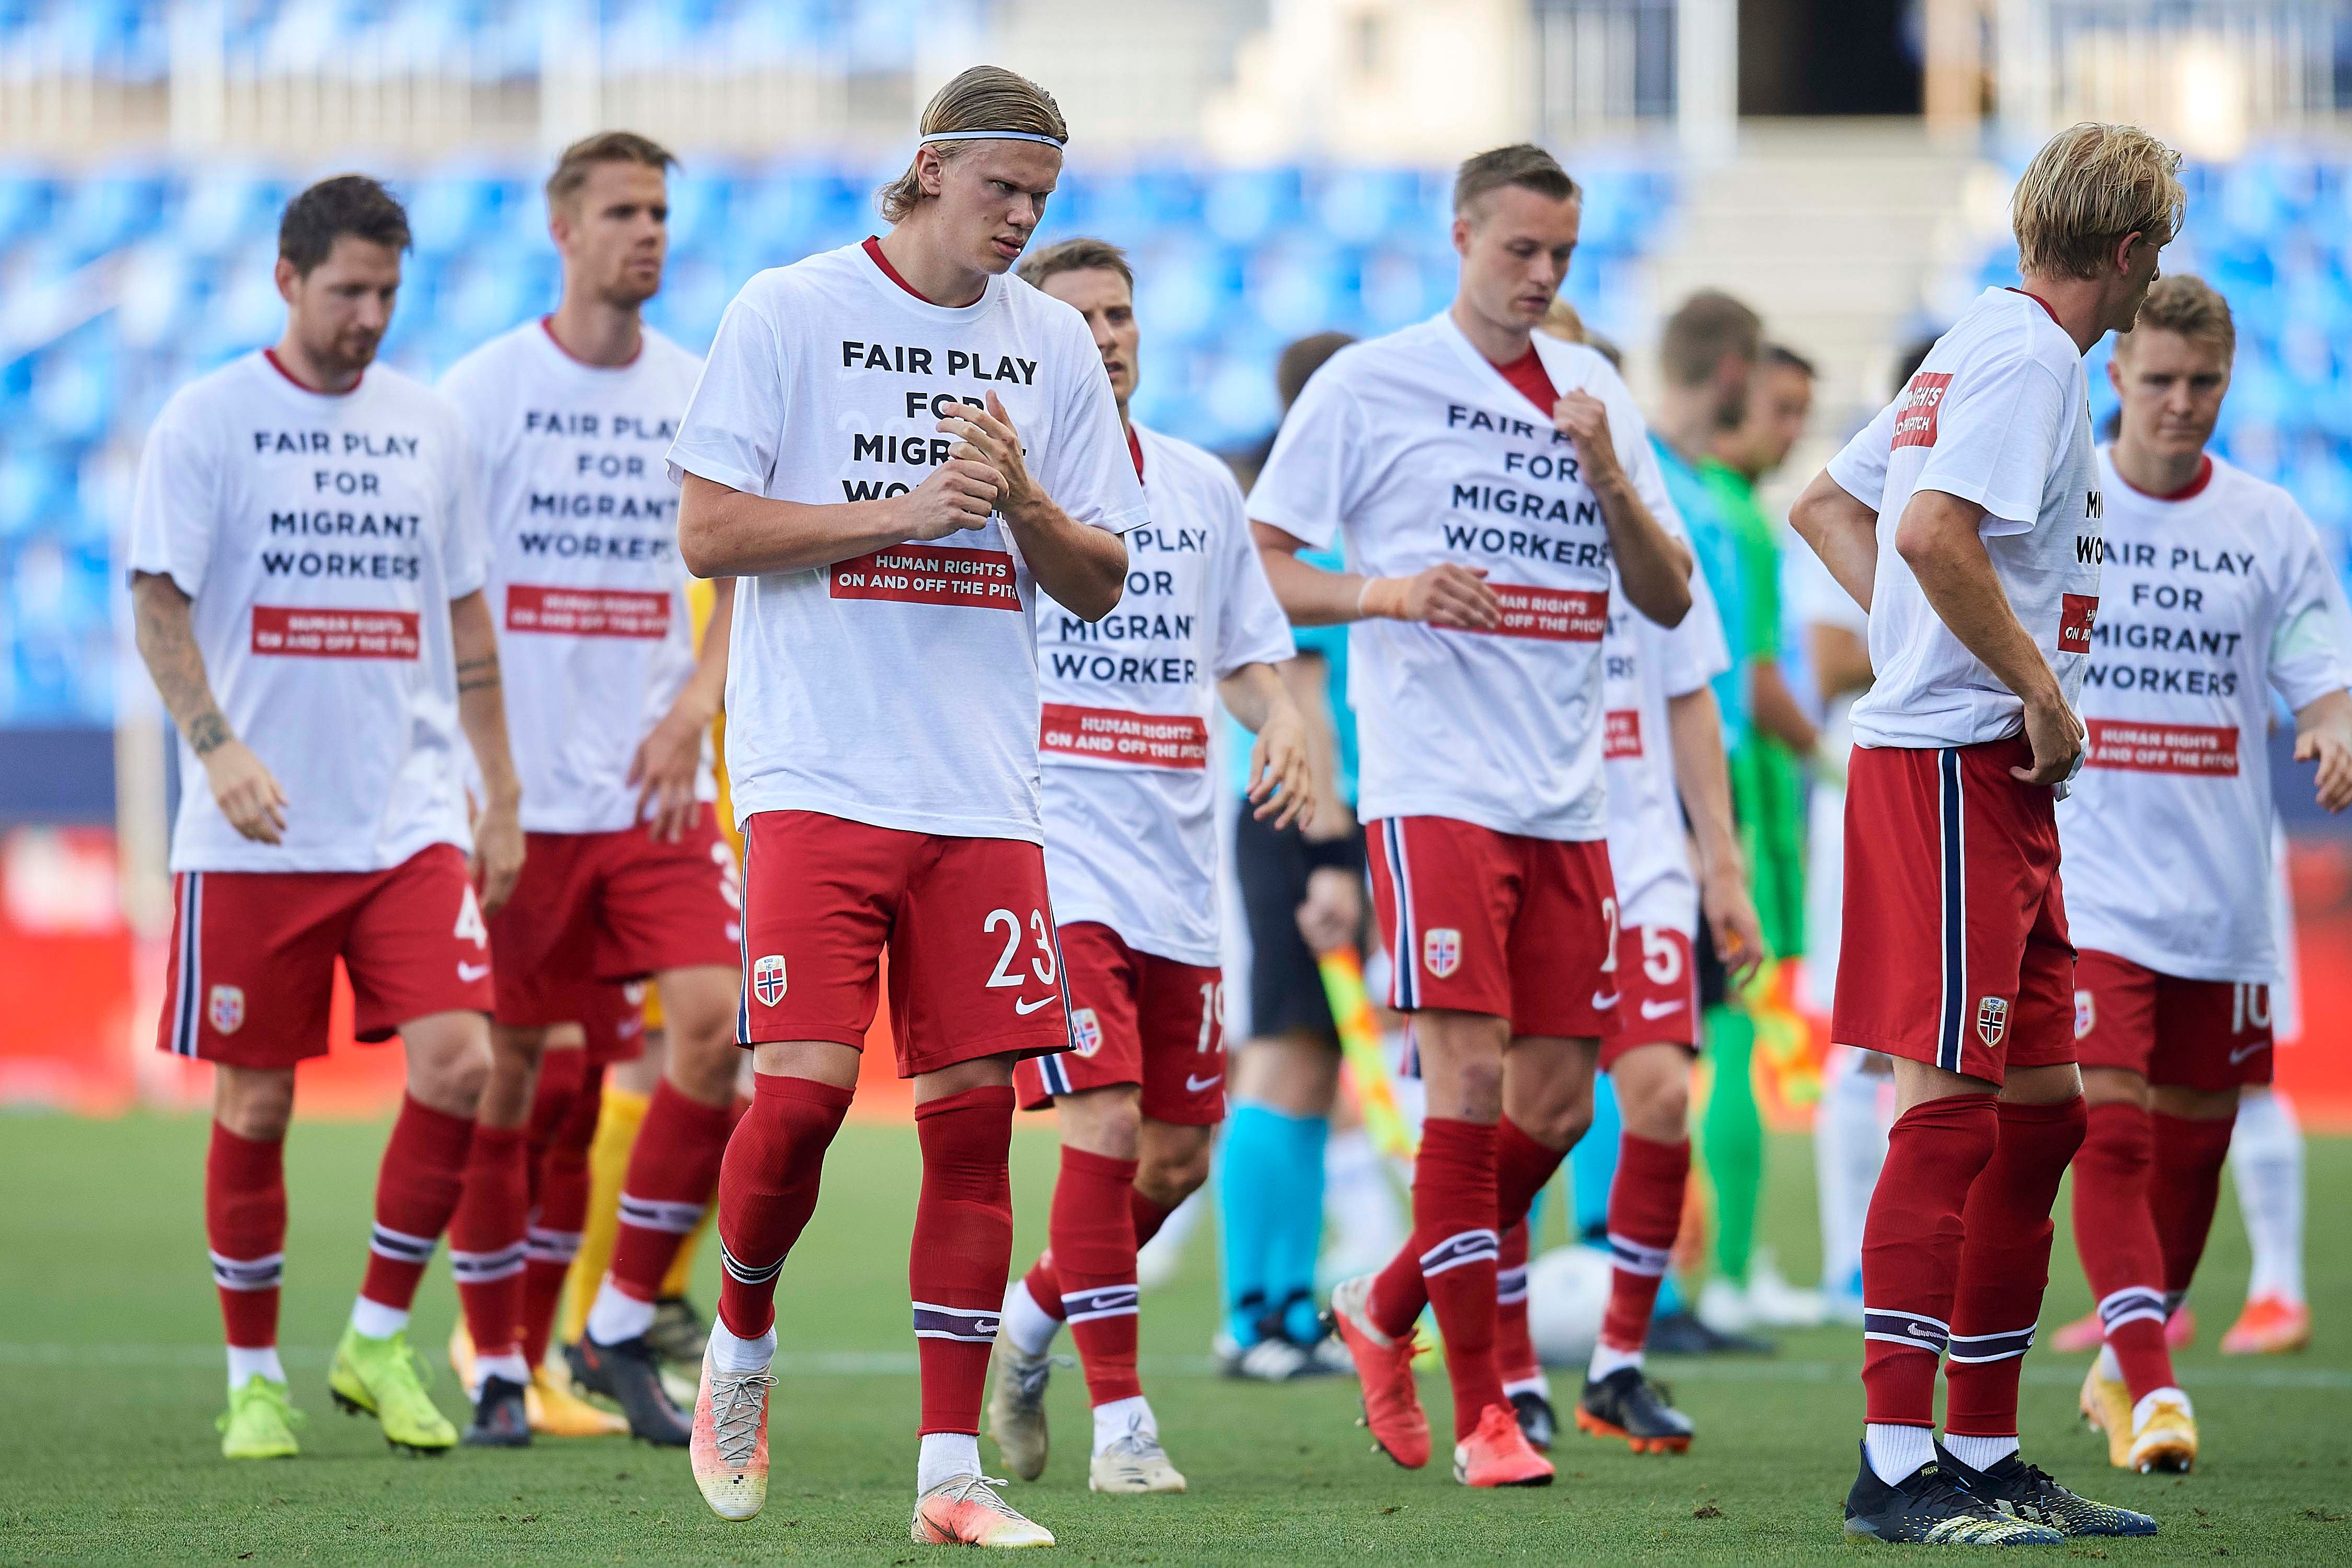 Members of a football team wear t-shirts calling for human rights for migrant workers 